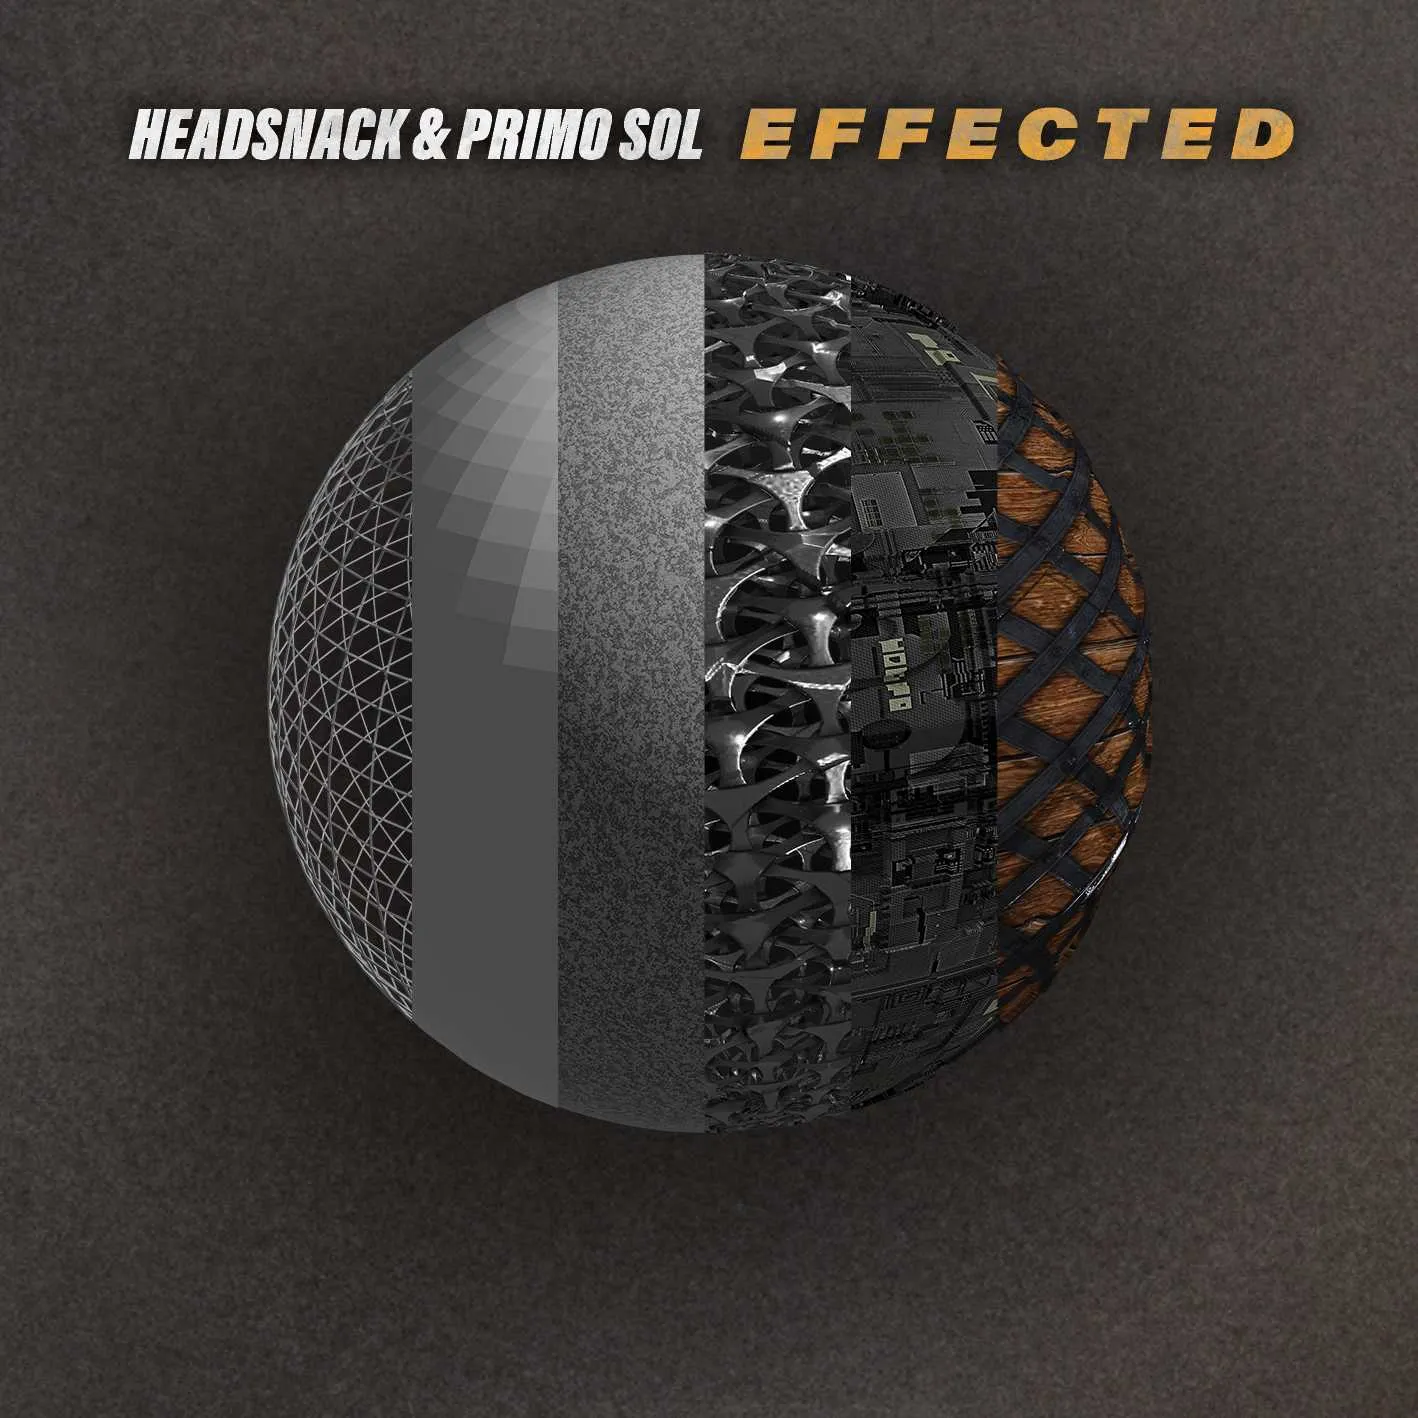 Cover of “Effected” by Headsnack &amp; Primo Sol